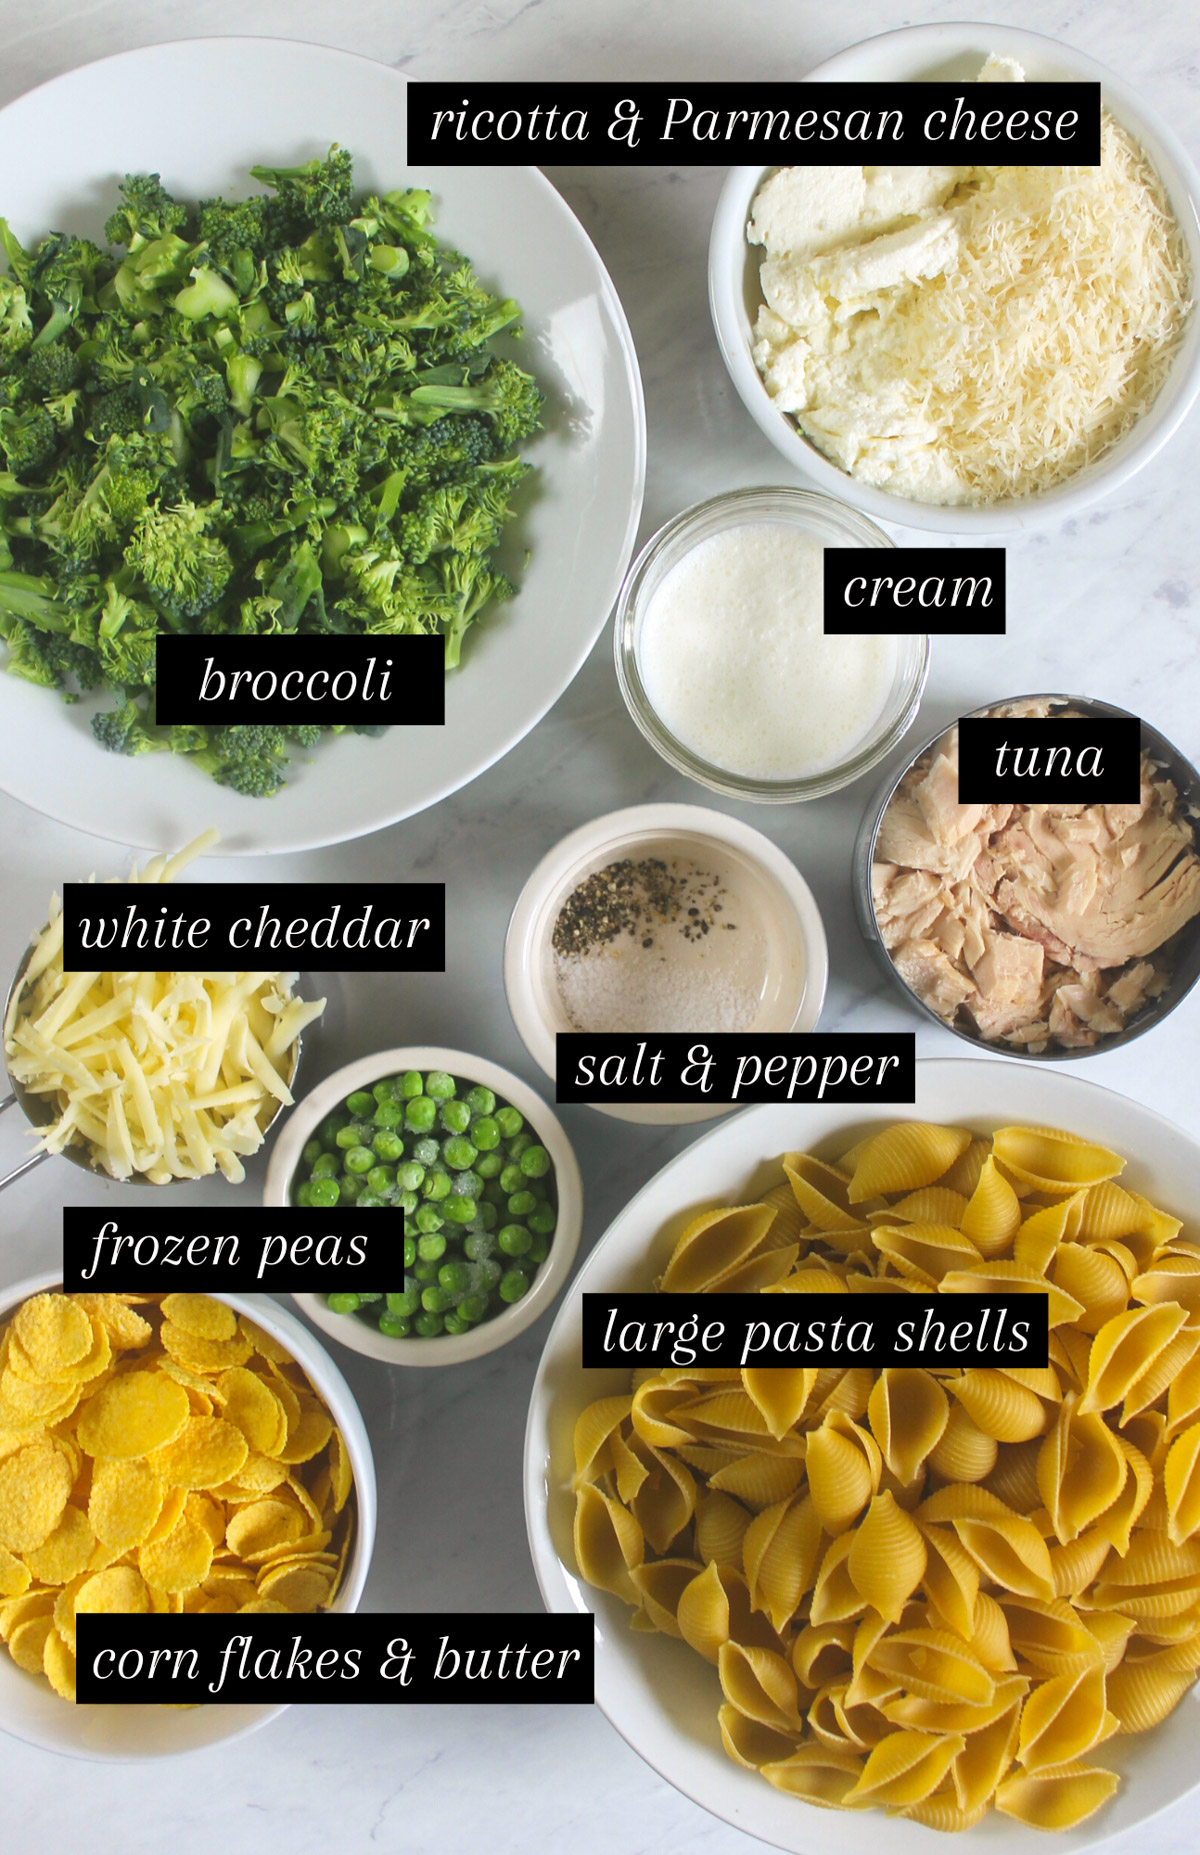 Labeled ingredients for Tuna Broccoli Pasta Bake.